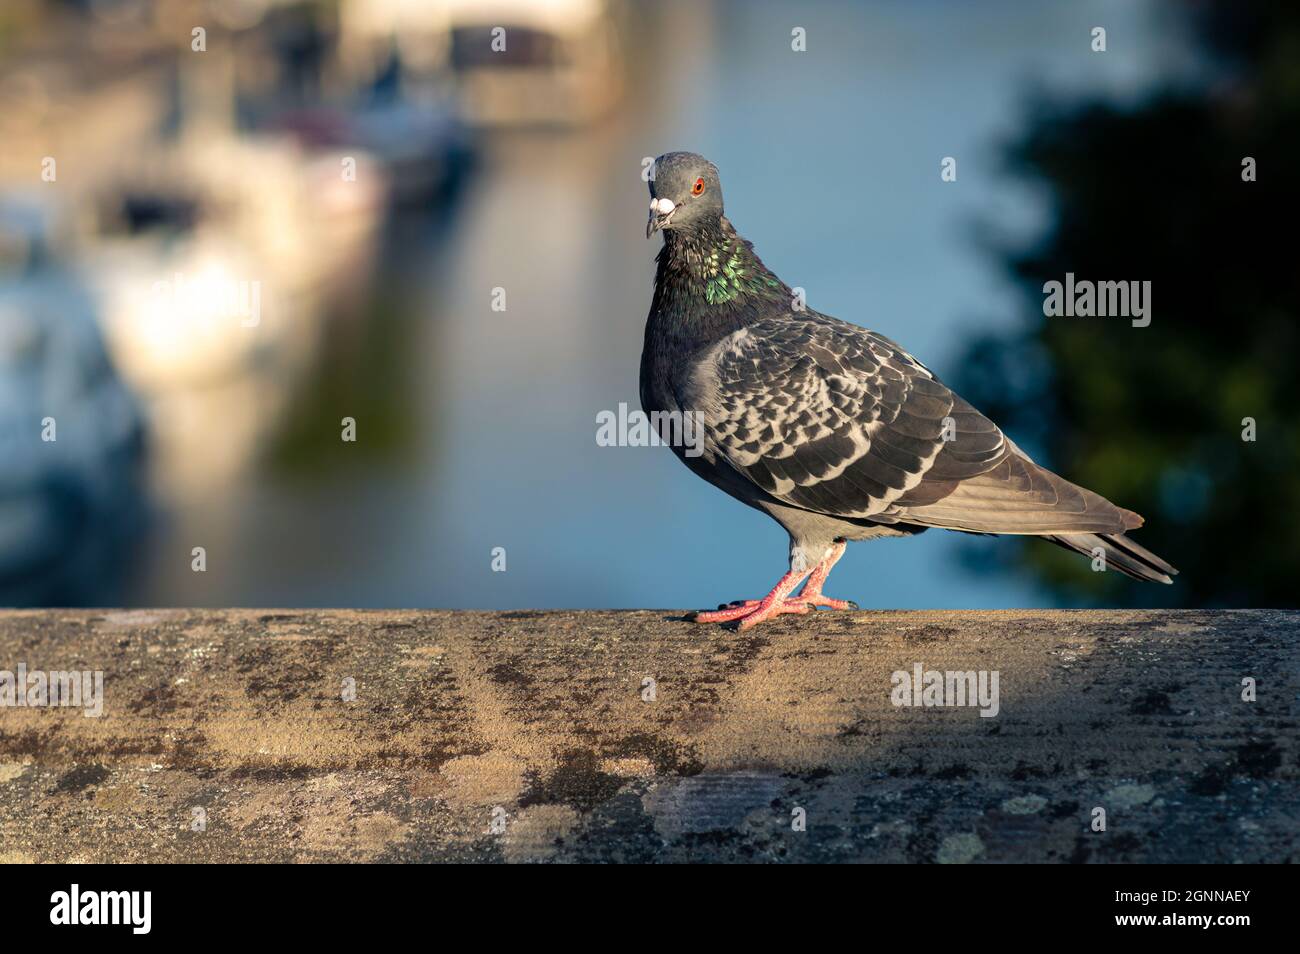 A feral city pigeon (Columba livia domestica) stands on a concrete ledge in the sunlight, glancing at the viewer from the side. A blurred bokeh backgr Stock Photo